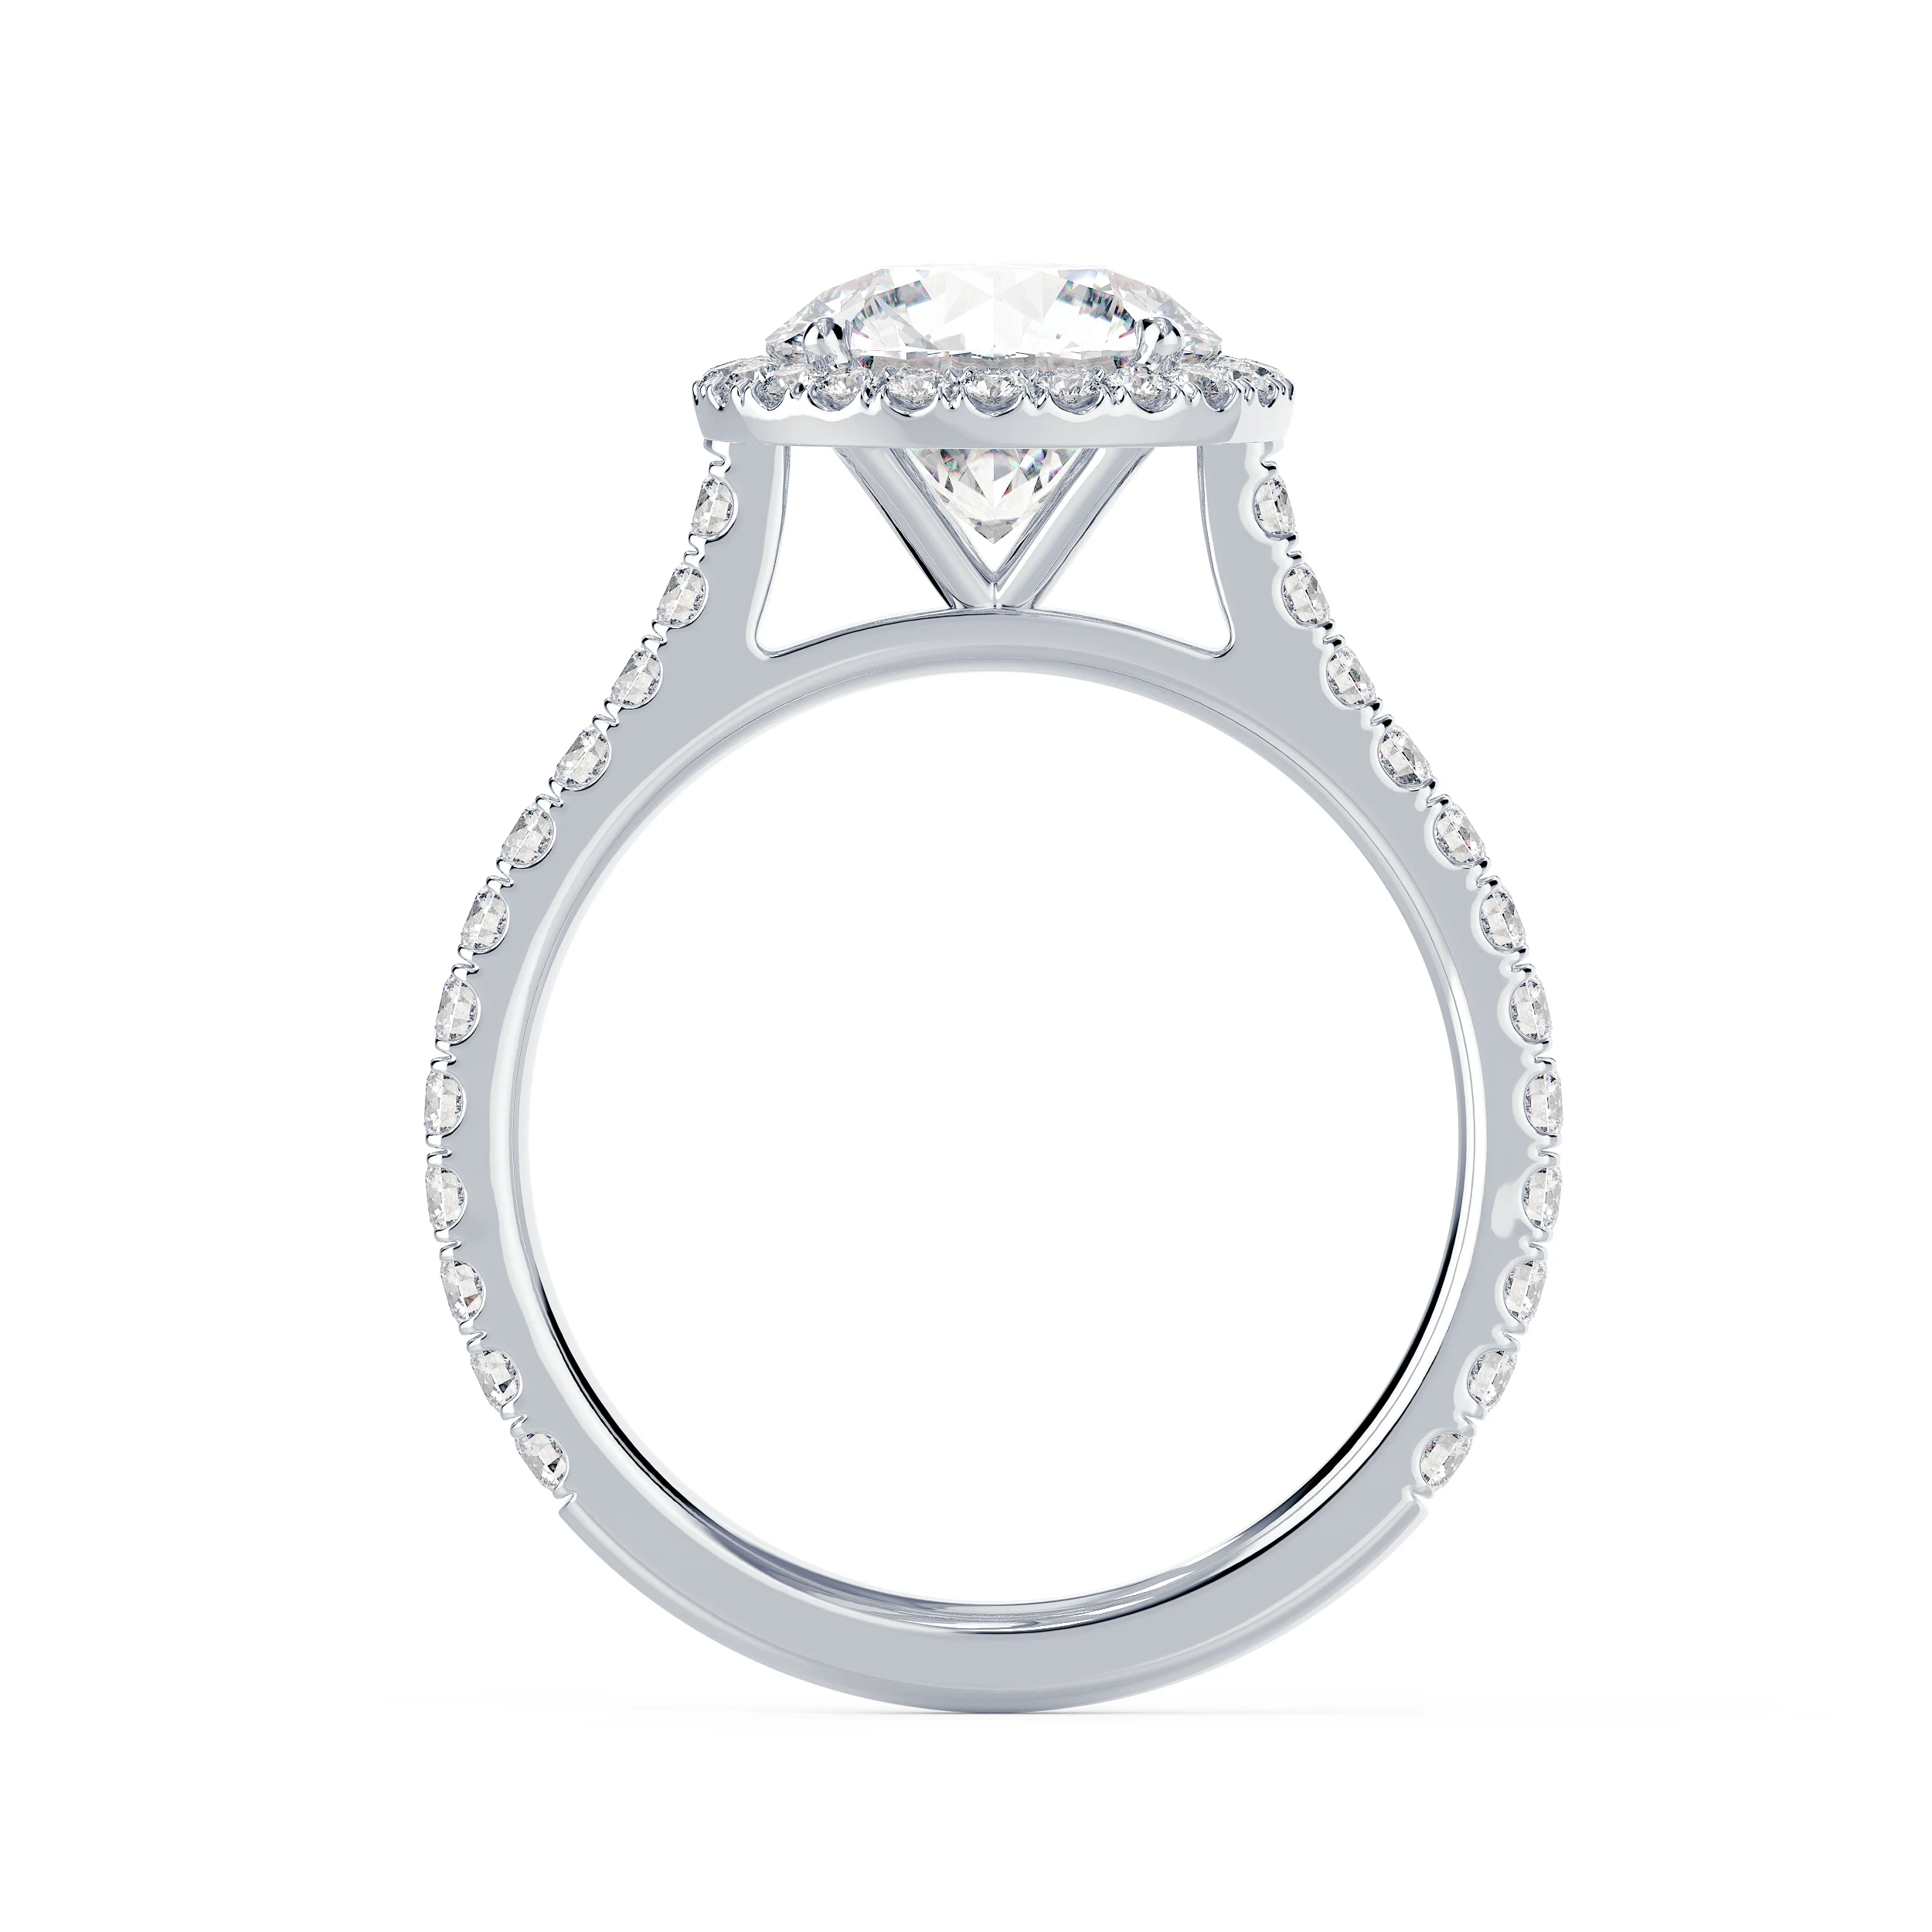 Exceptional Quality Lab Created Diamonds Round Halo Pavé Setting in White Gold (Profile View)